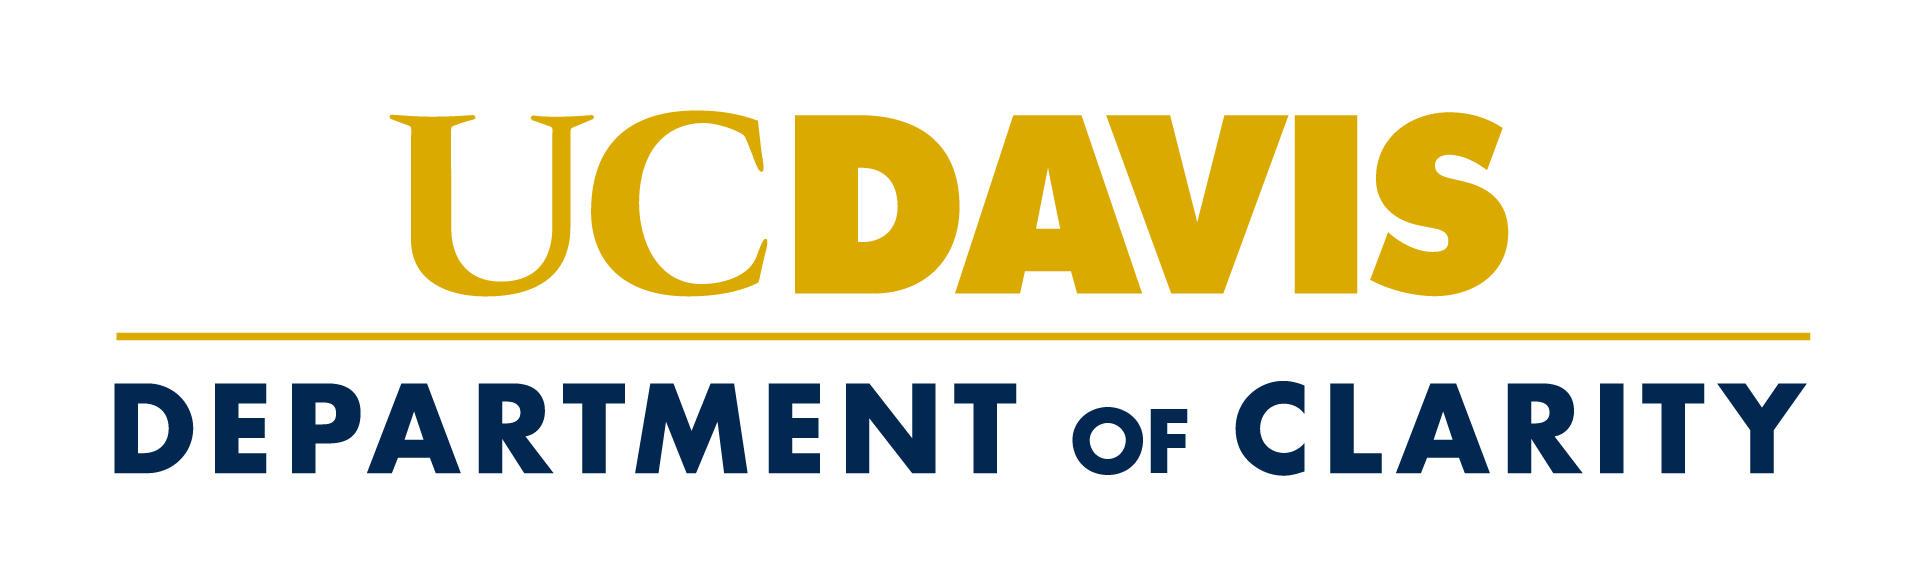 Unit signature showing only one level below the UC Davis wordmark